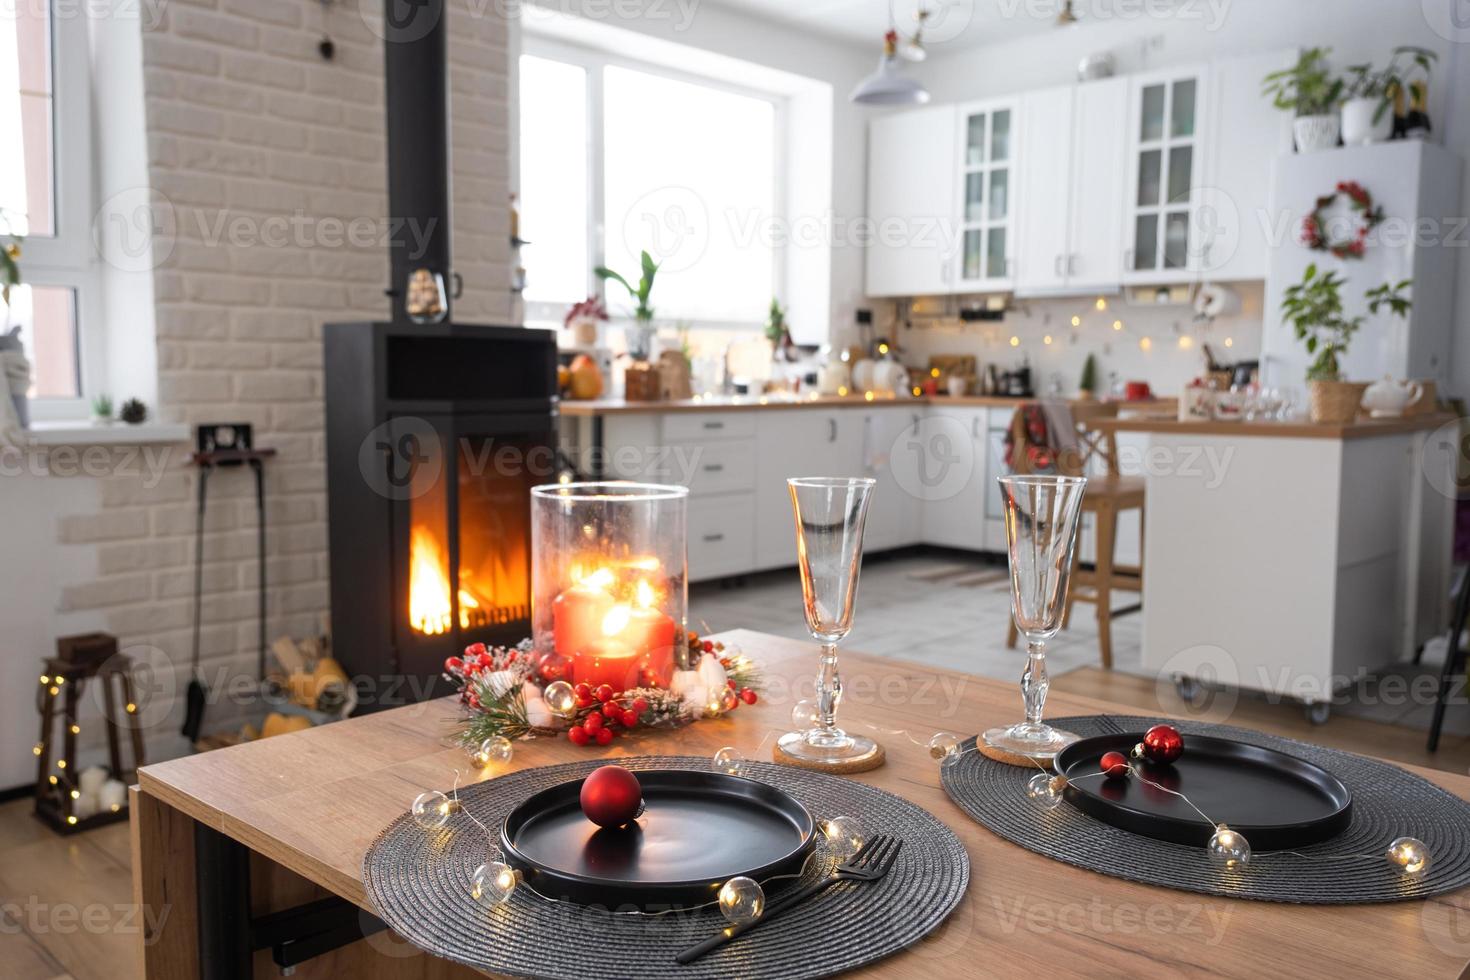 Festive interior of house is decorated for Christmas and New Year in loft style with black stove, fireplace, Christmas tree. Warm studio room with set table, burning wood, cozy and heating of home photo